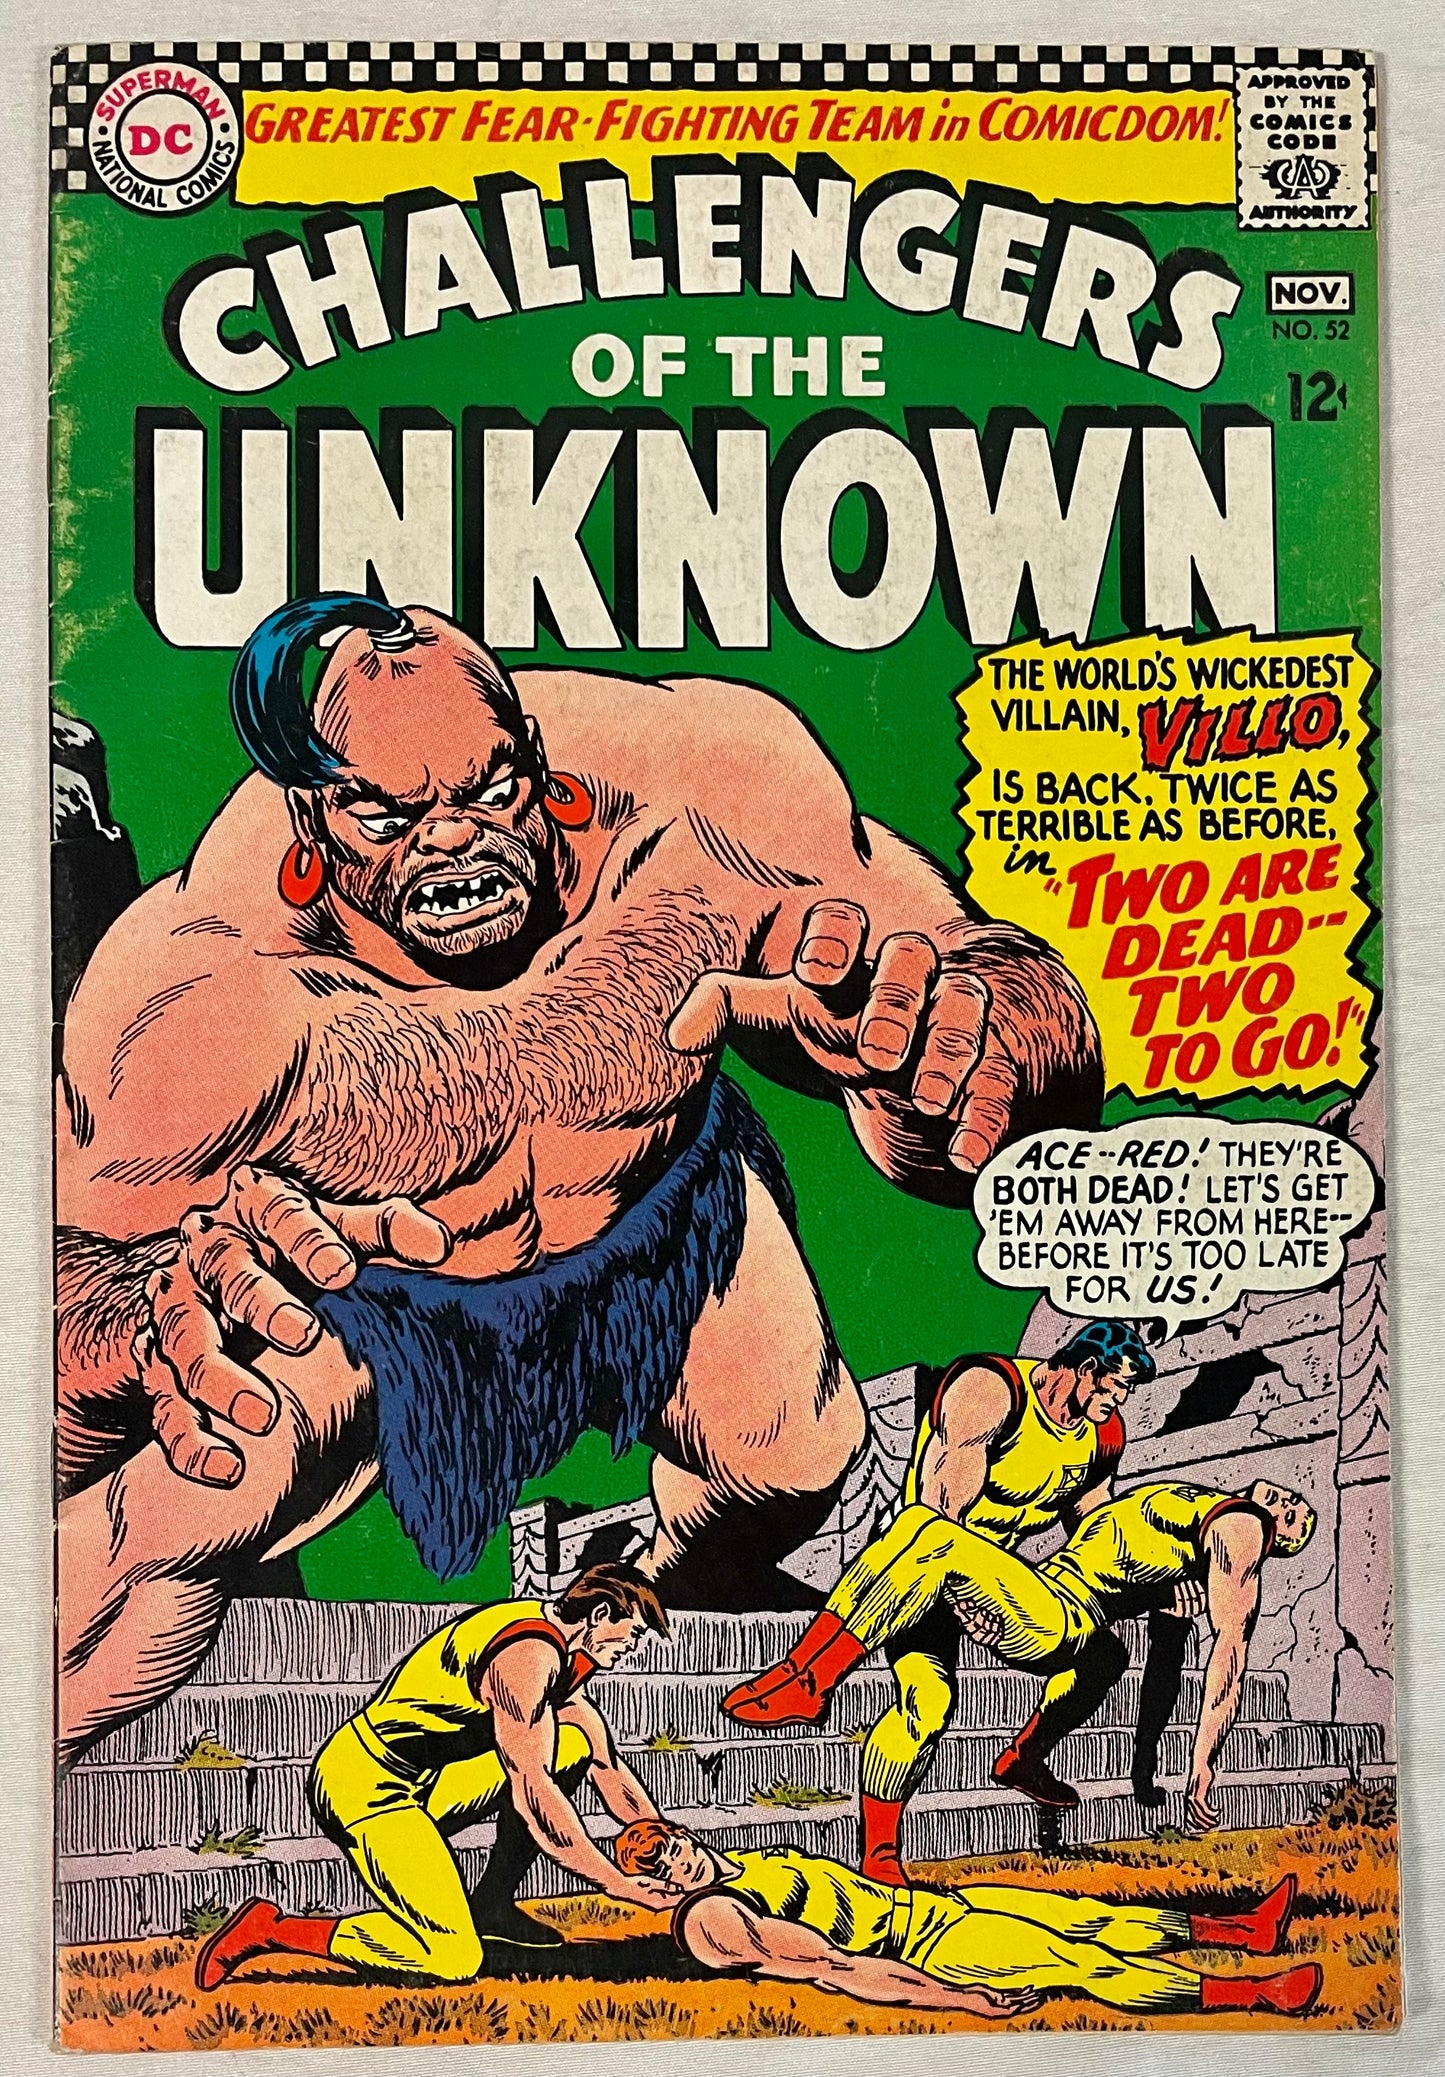 DC Comics Challengers of The Unknown No. 52